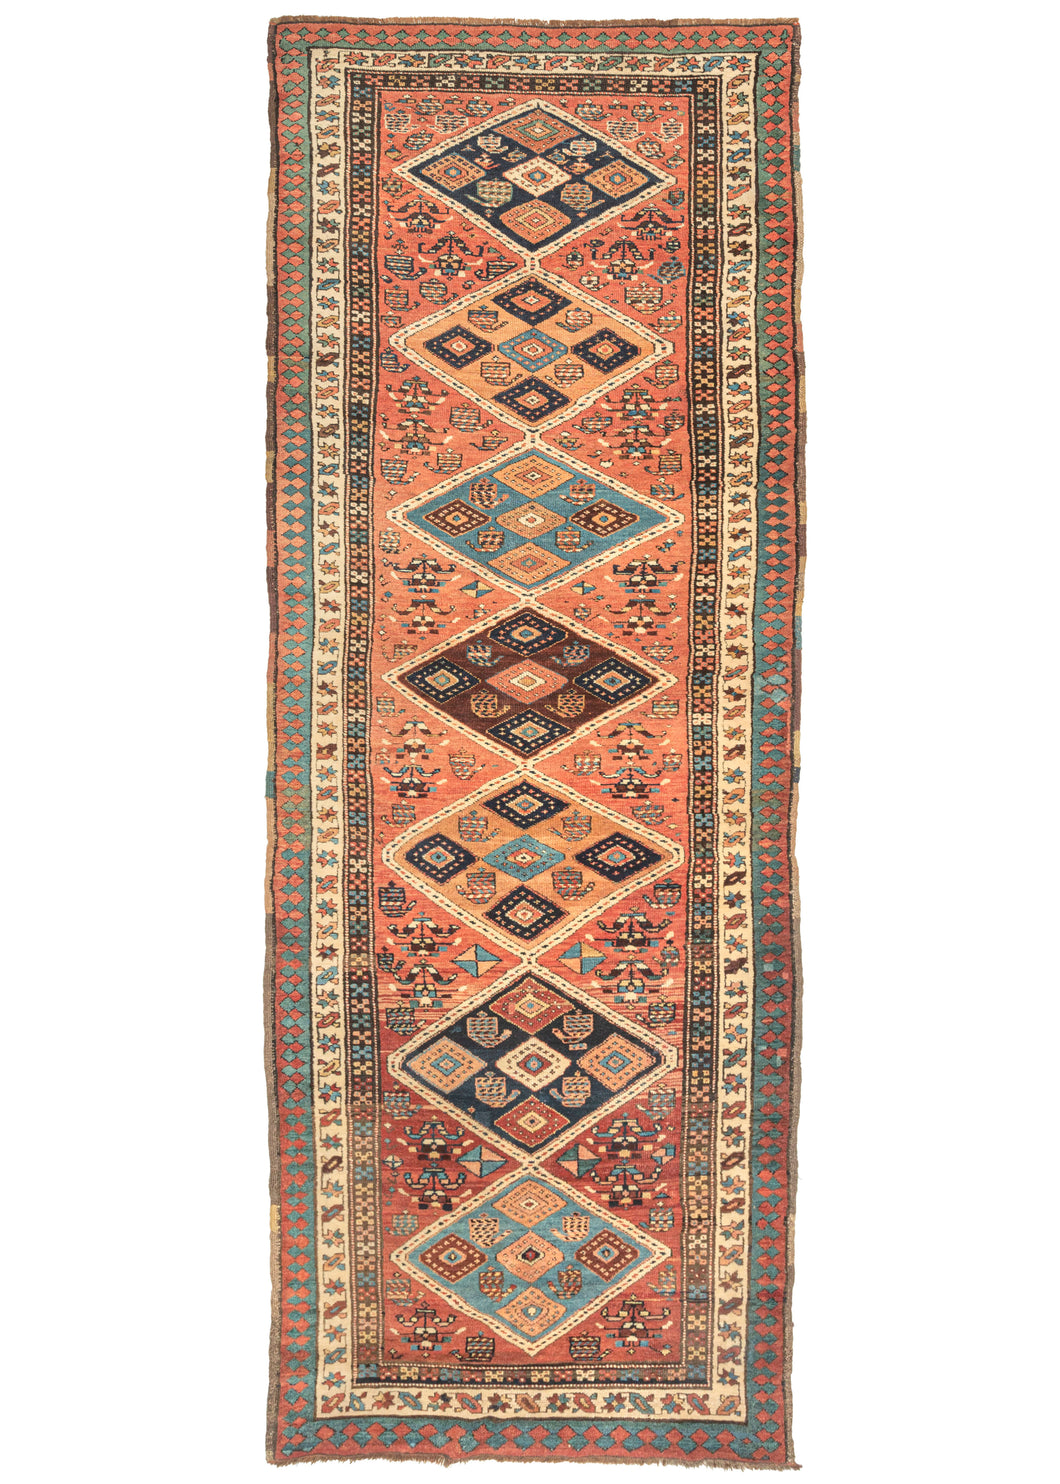 This Antique NW Persian Runner features large diamonds in orange, brown, light, and dark blue on a brick ground. Each diamond is filled with five further diamonds 